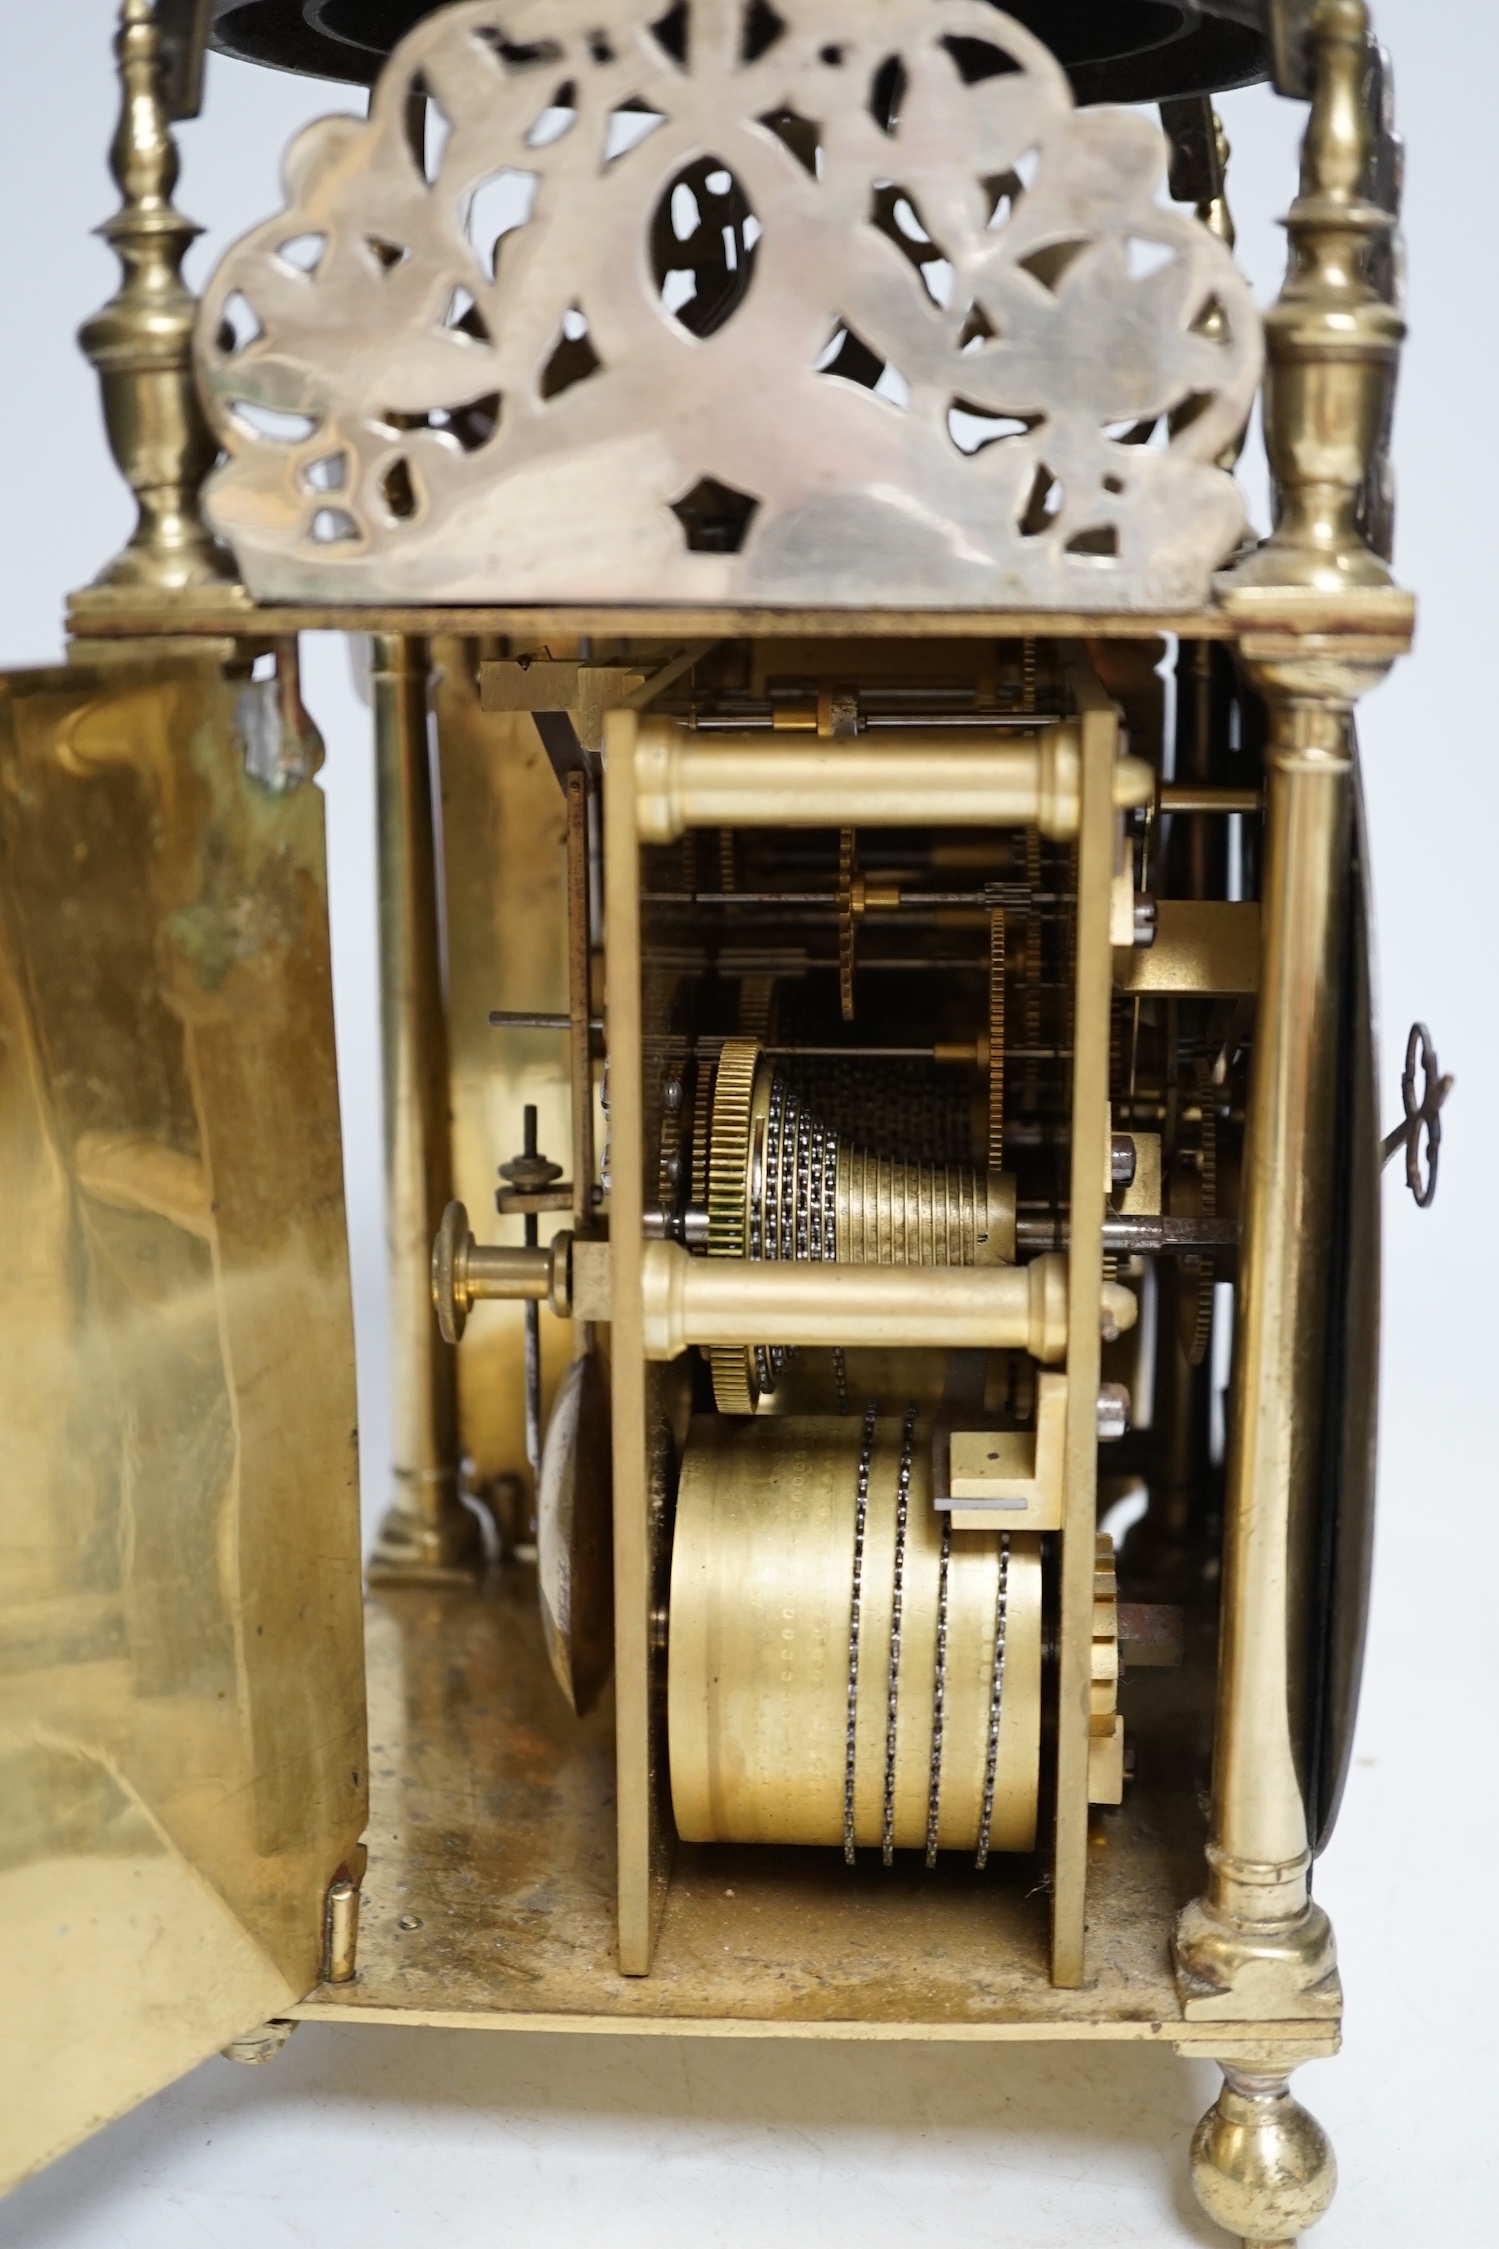 A late 19th century lantern clock with fusee movement, 37cm high. Condition - fair, not tested